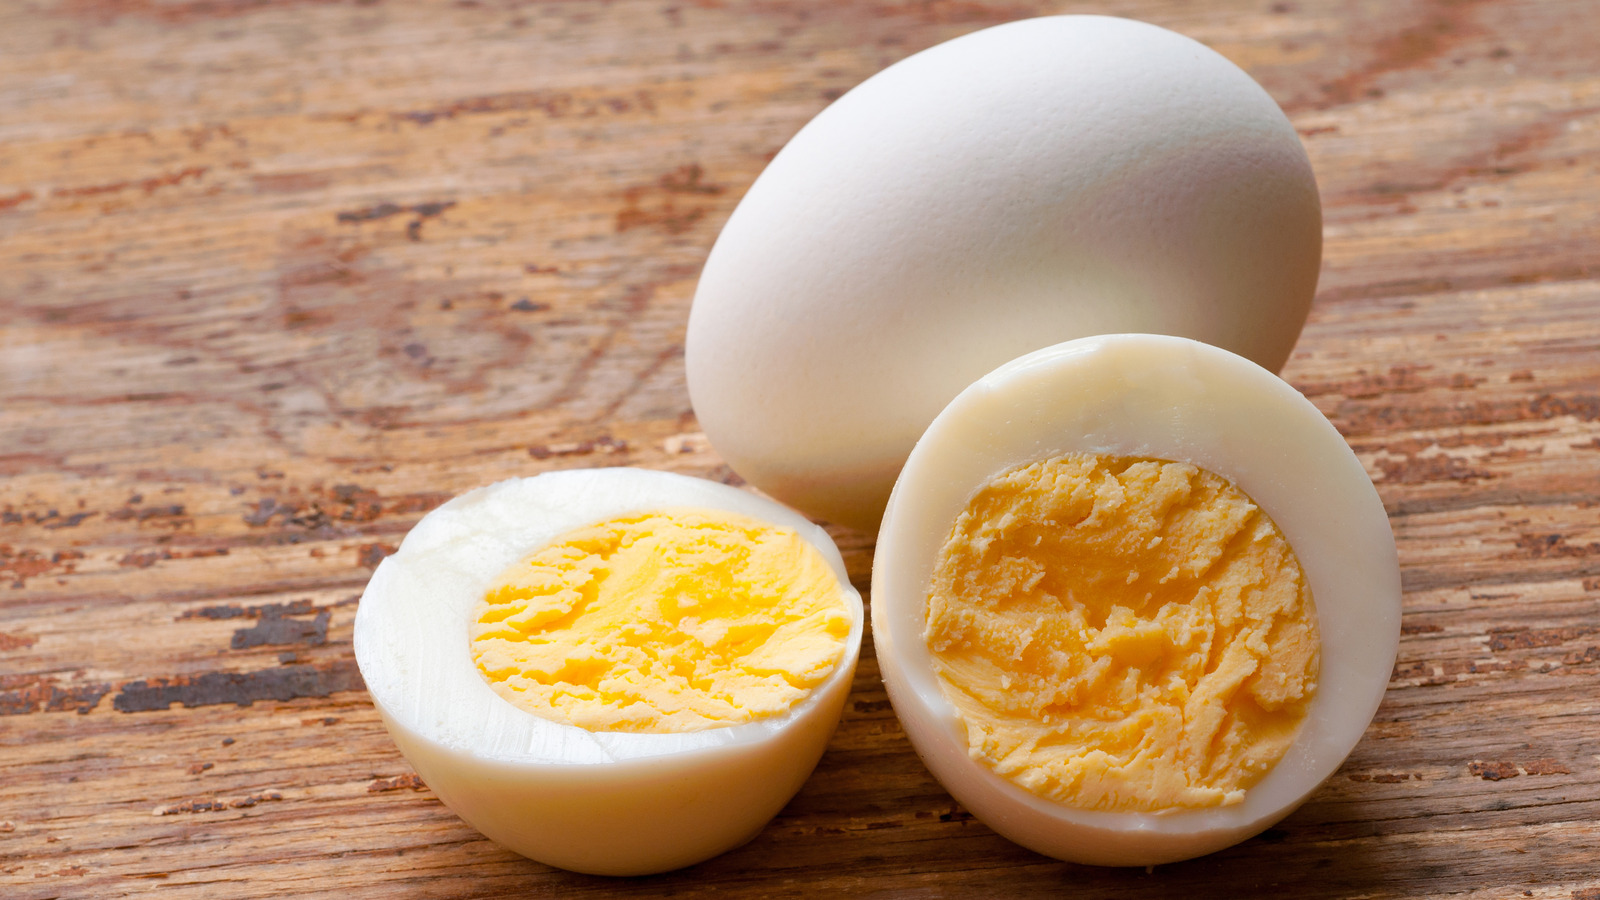 The Interesting Hack For Hard Boiled Egg Lovers Who Aren't Fans Of The Yolk